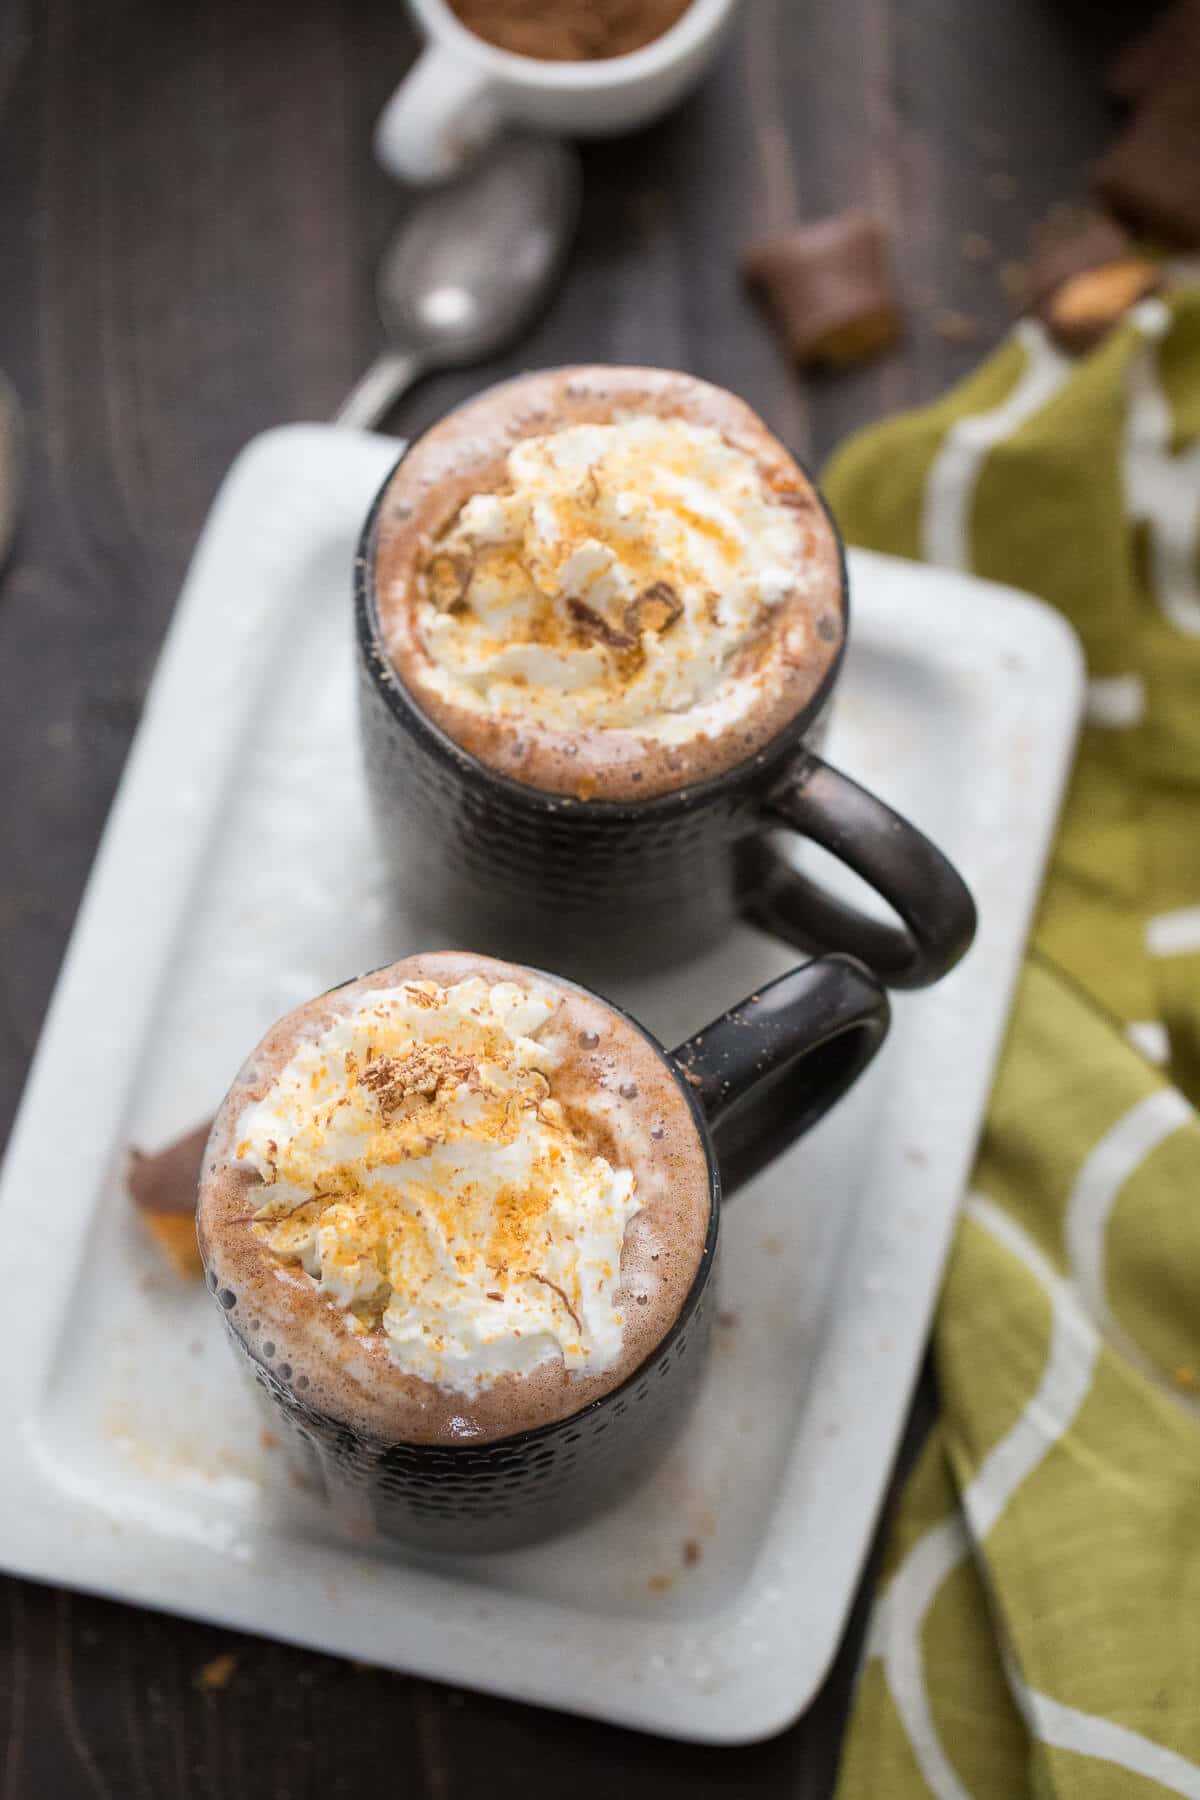 This Butterfinger Hot Cocoa recipe tastes like the famous candy! This boozy version is warm and silky warm adult beverage!